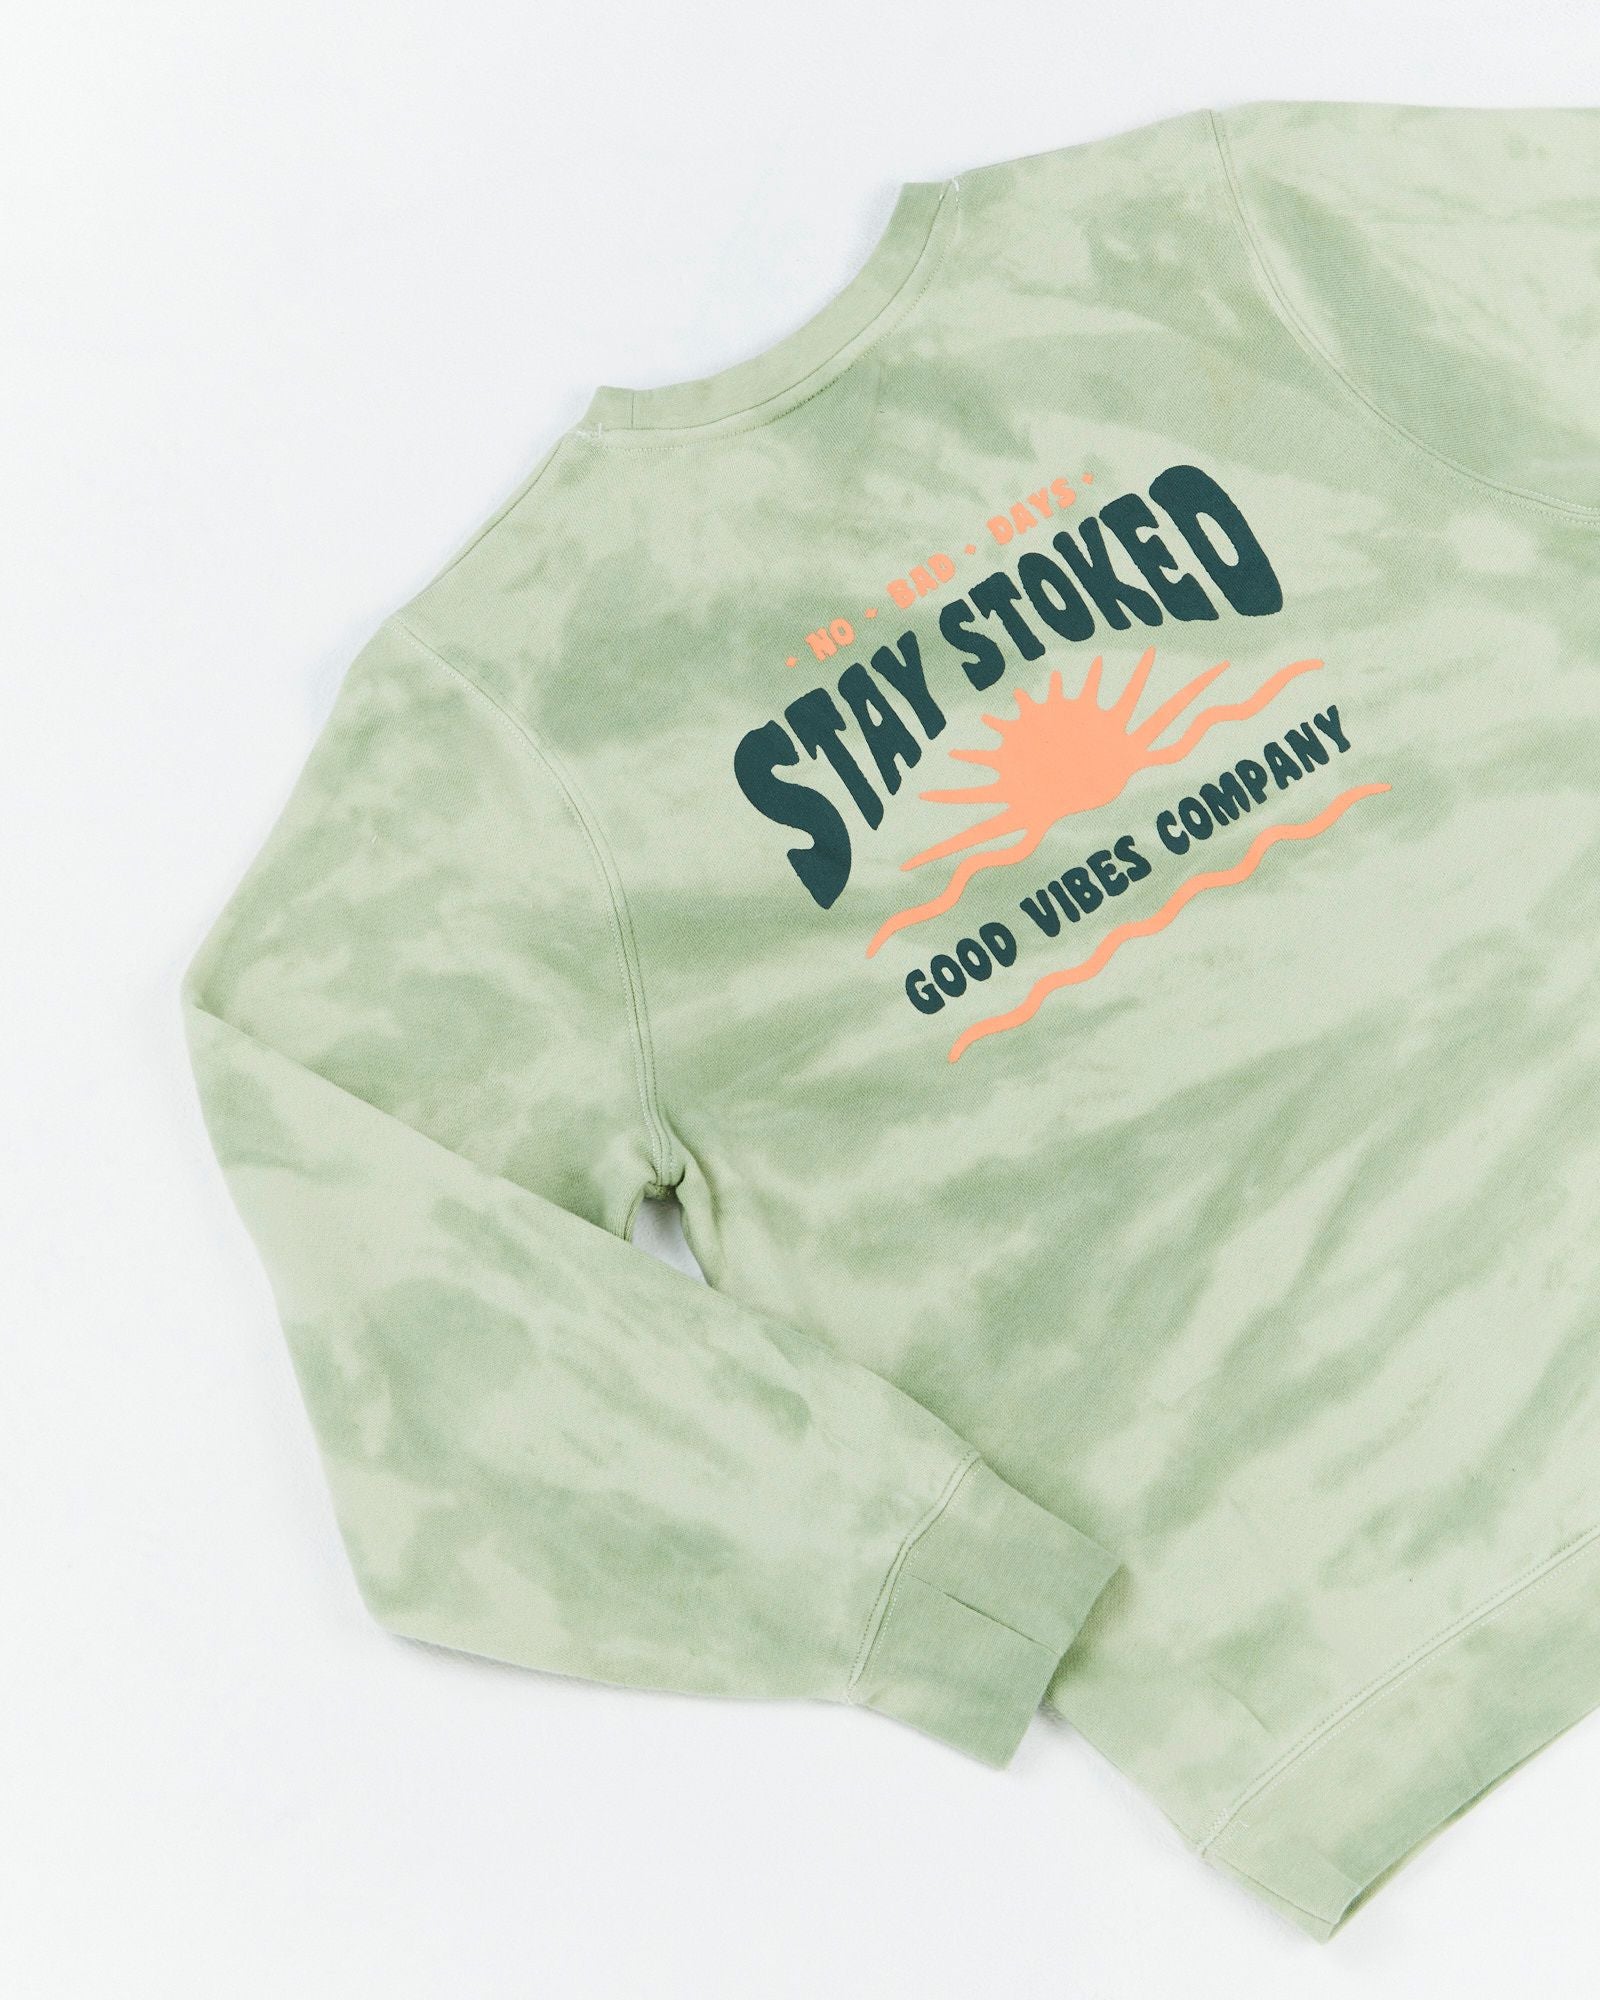 Alphabet Soup's Kids Camo Crew in Thyme Dye Camp print for boys aged 2-7. Featuring 100% Cotton French Terry, heavy fabric weight for comfort. Regular fit, straight hemline, ribbed crew neckline, thumbholes in cuffs. Tie dye with print to chest and back.